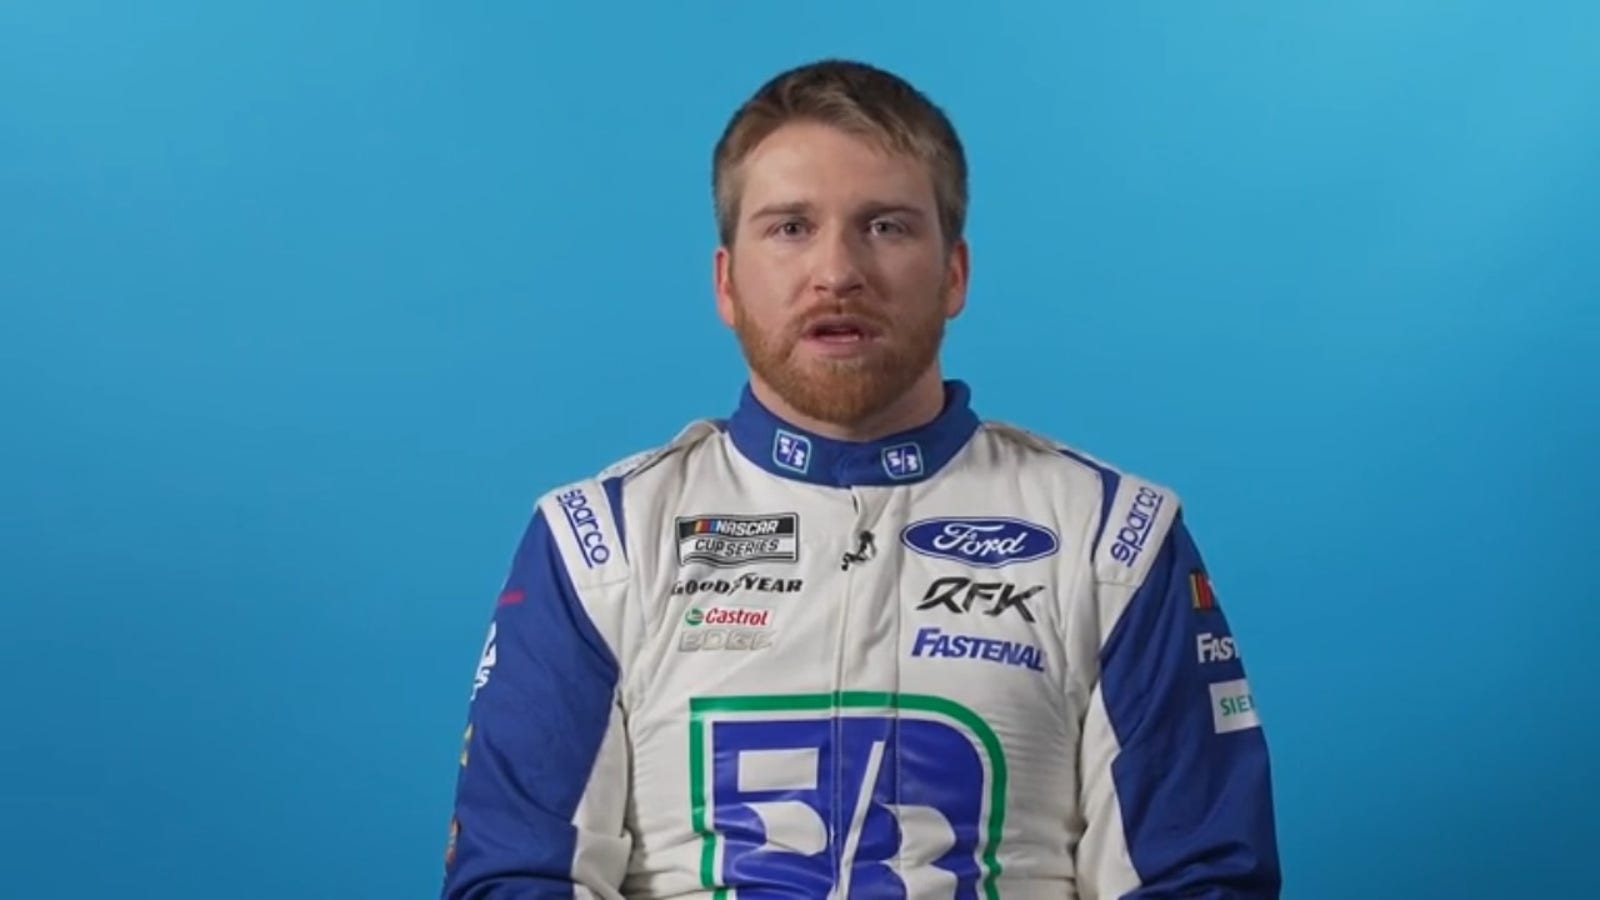 Buescher shares his excitement for RFK's upcoming season